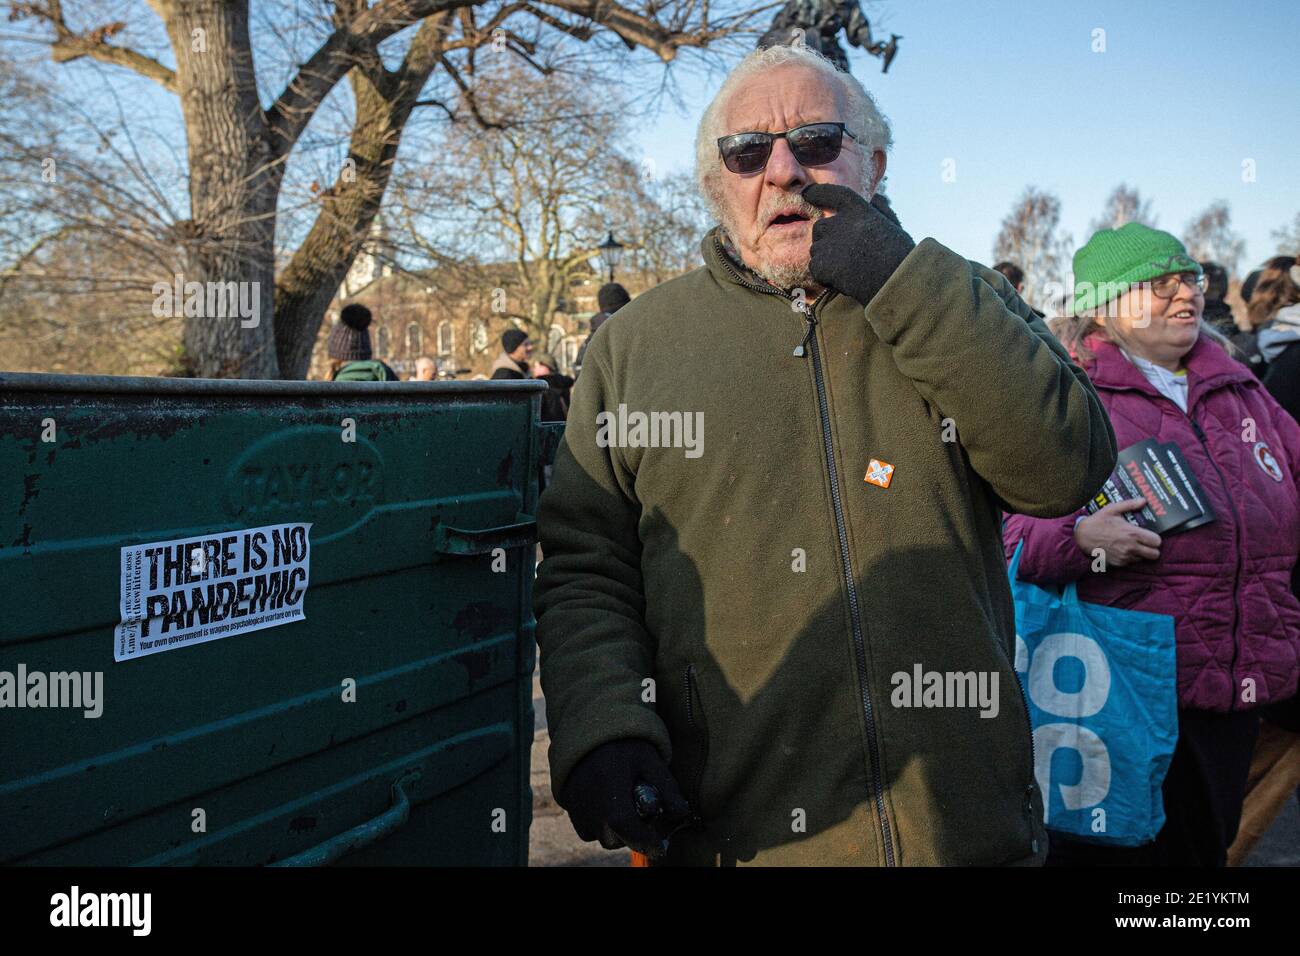 Protestors gathering in Clapham Common during the anti-lockdown demonstration on January 9, 2021 in London, England. Stock Photo